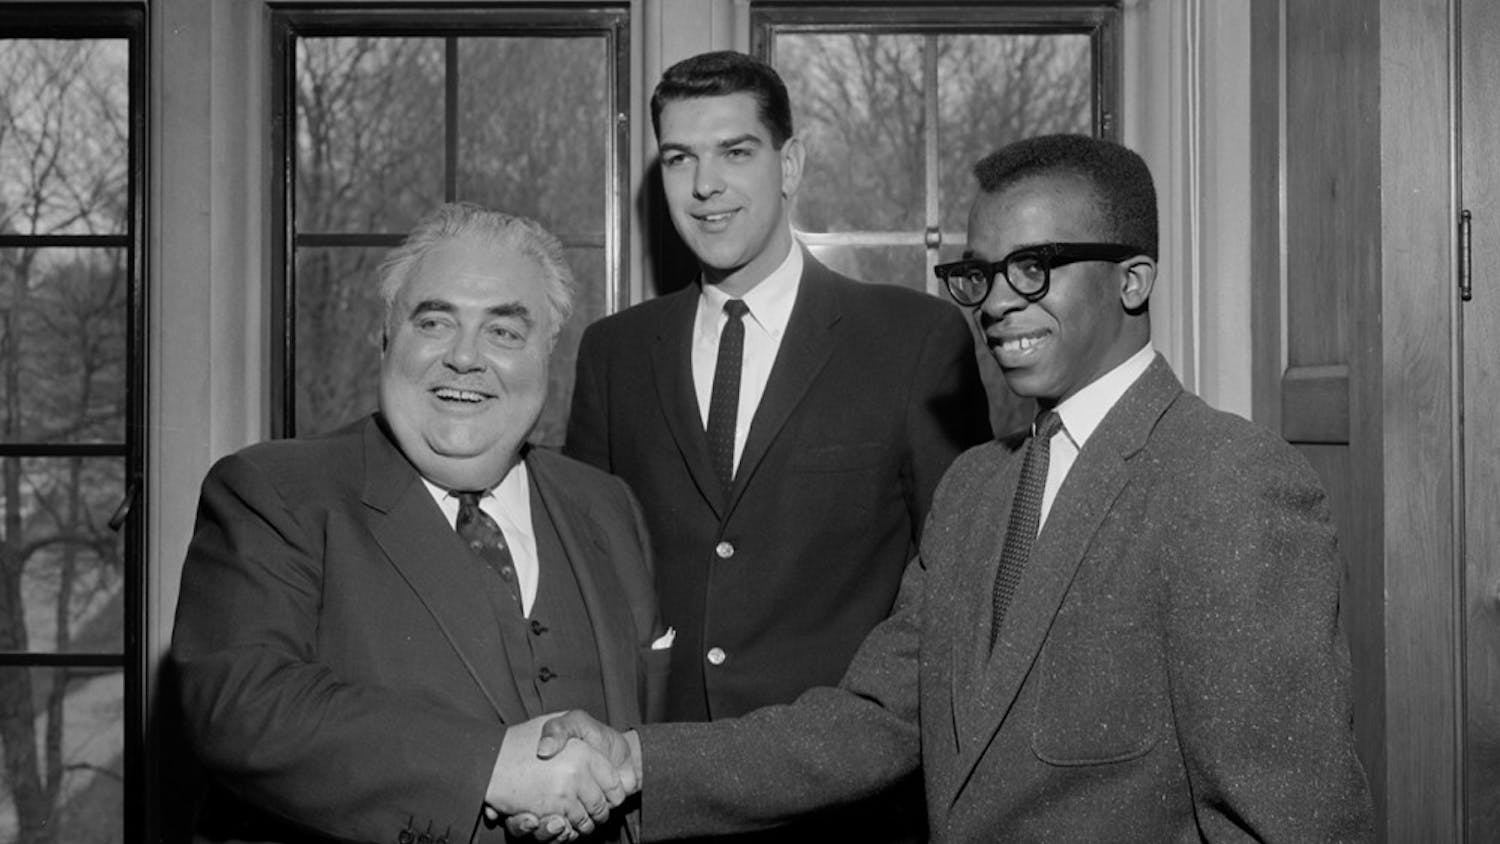 Thomas Atkins, first Black student body president in the Big Ten Conference, shakes hands with Herman B Wells after his election in 1960. Atkins would go on to serve as a Boston City Council Member and lawyer for the NAACP.